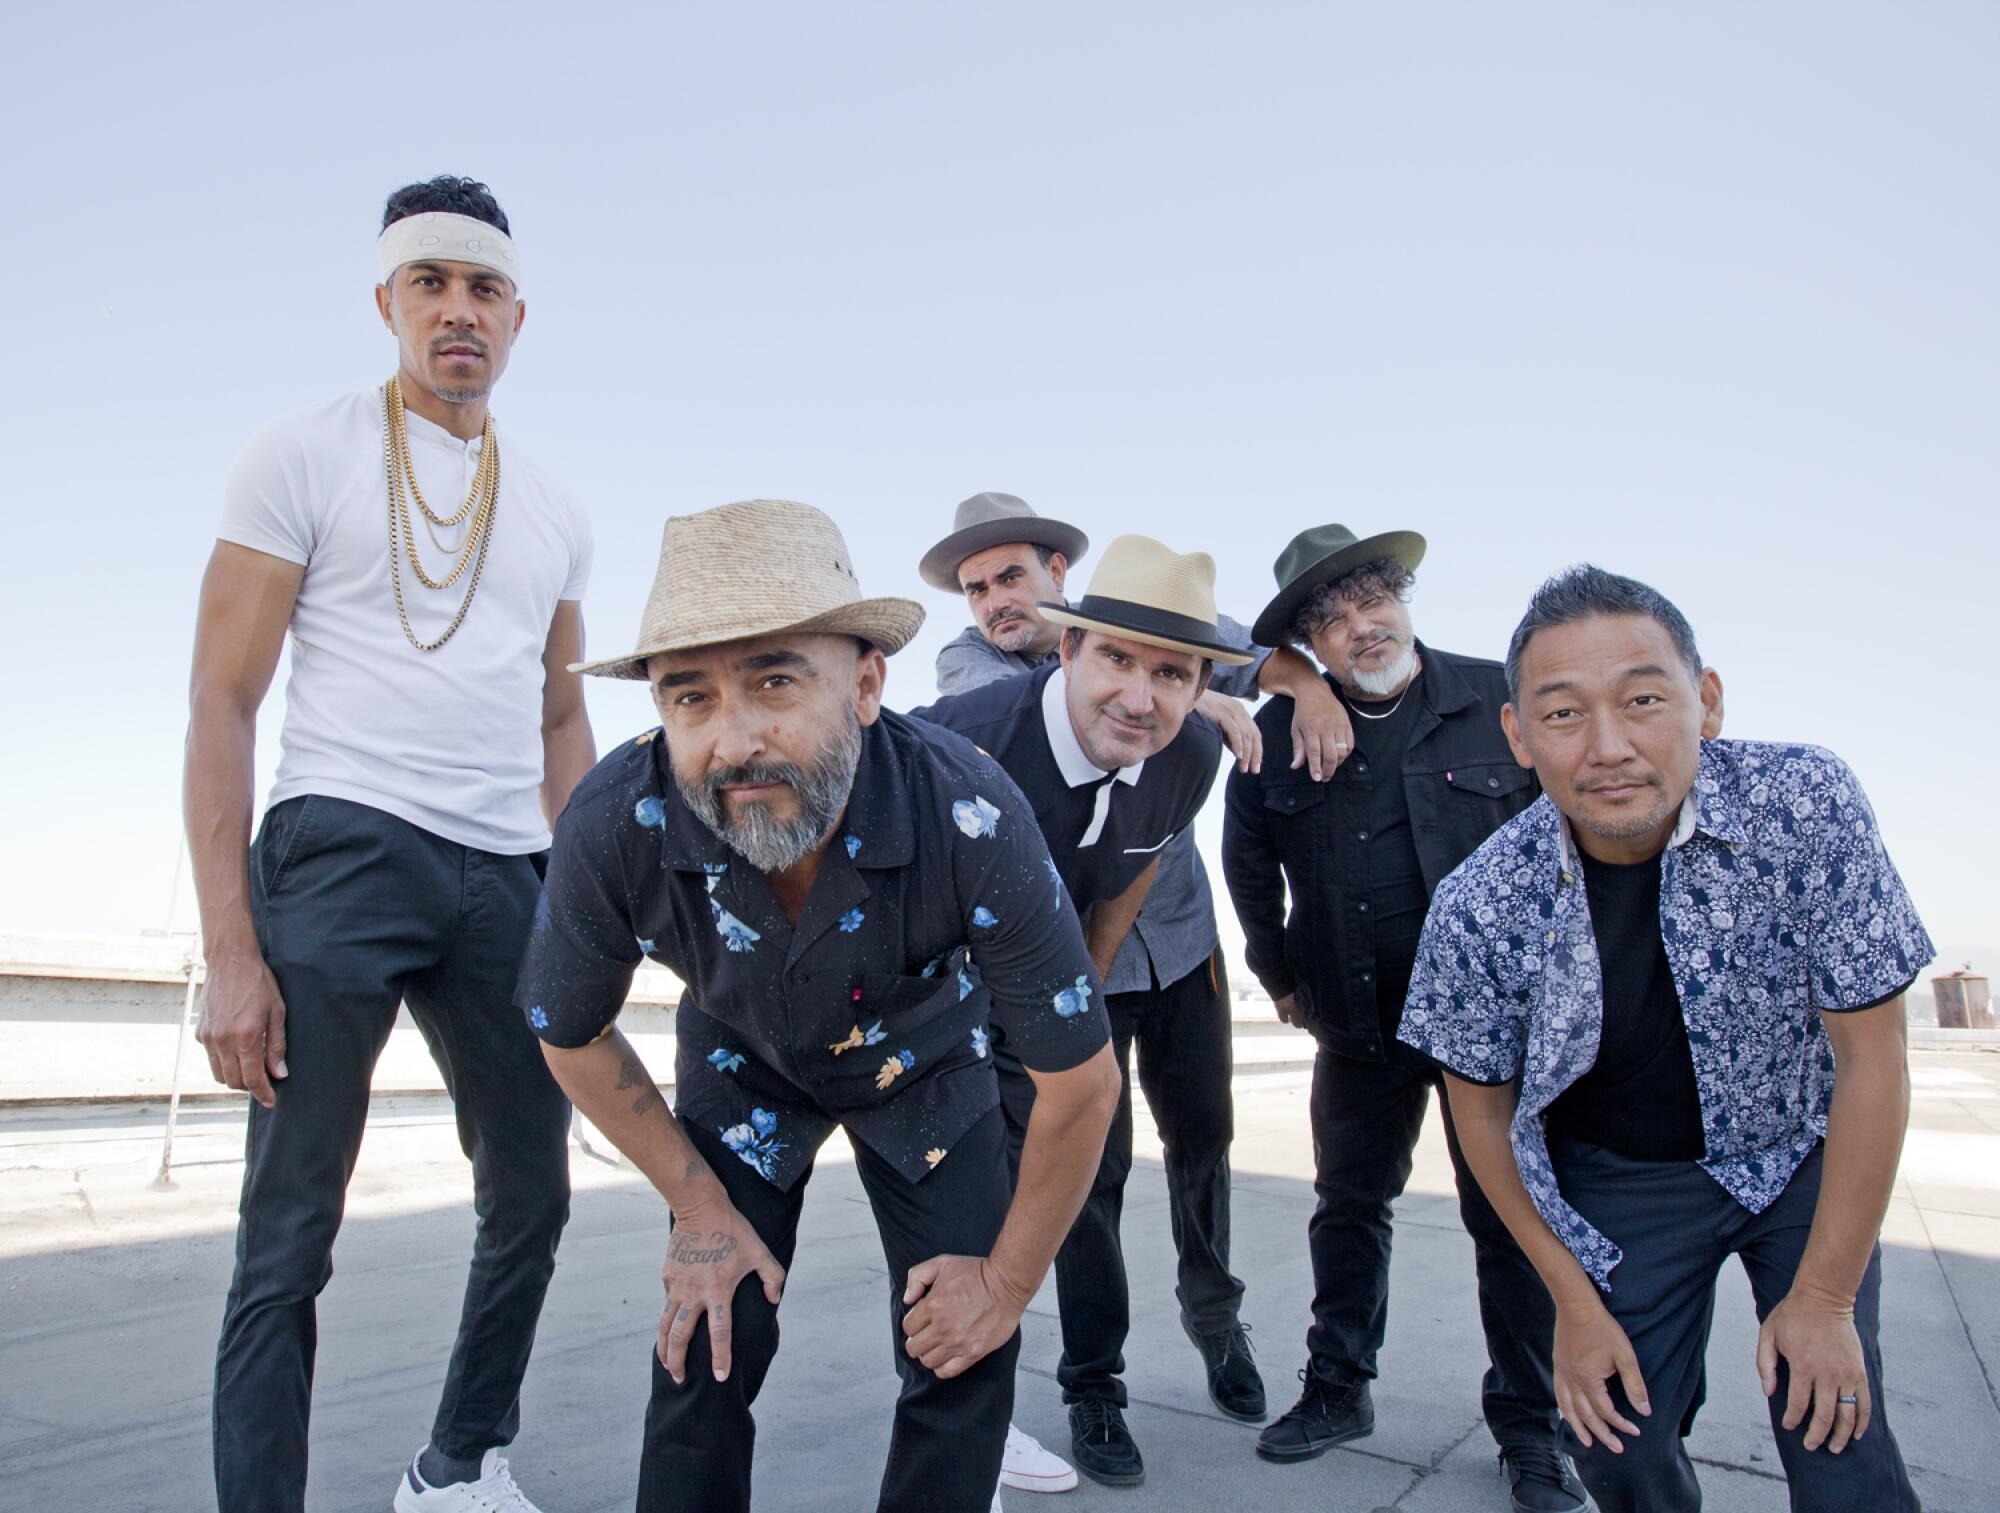 Six men, most wearing hats, most bending at the waist, looking at the camera